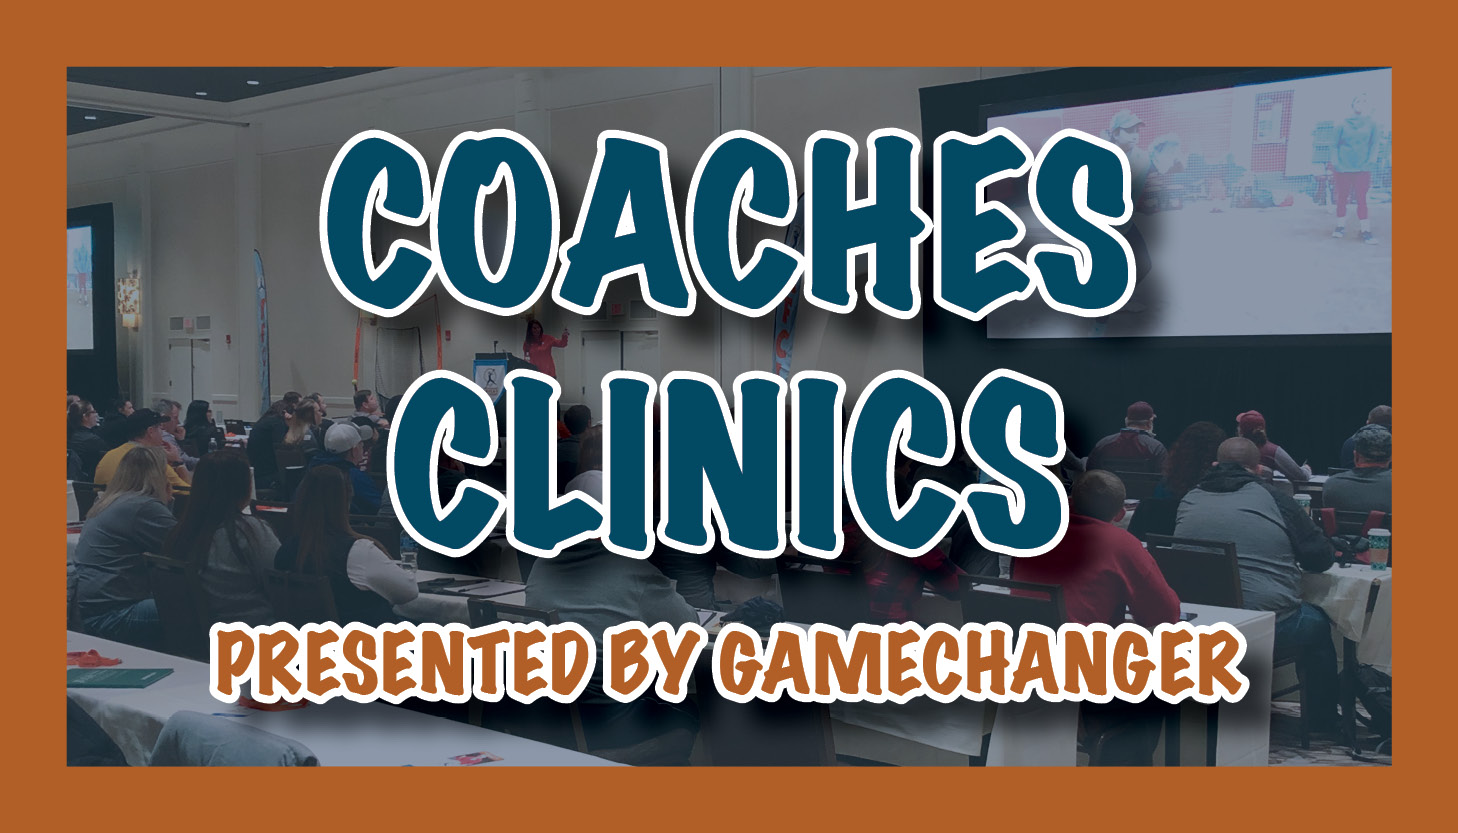 NFCA COACHES CLINICS PRESENTED BY GAMECHANGER